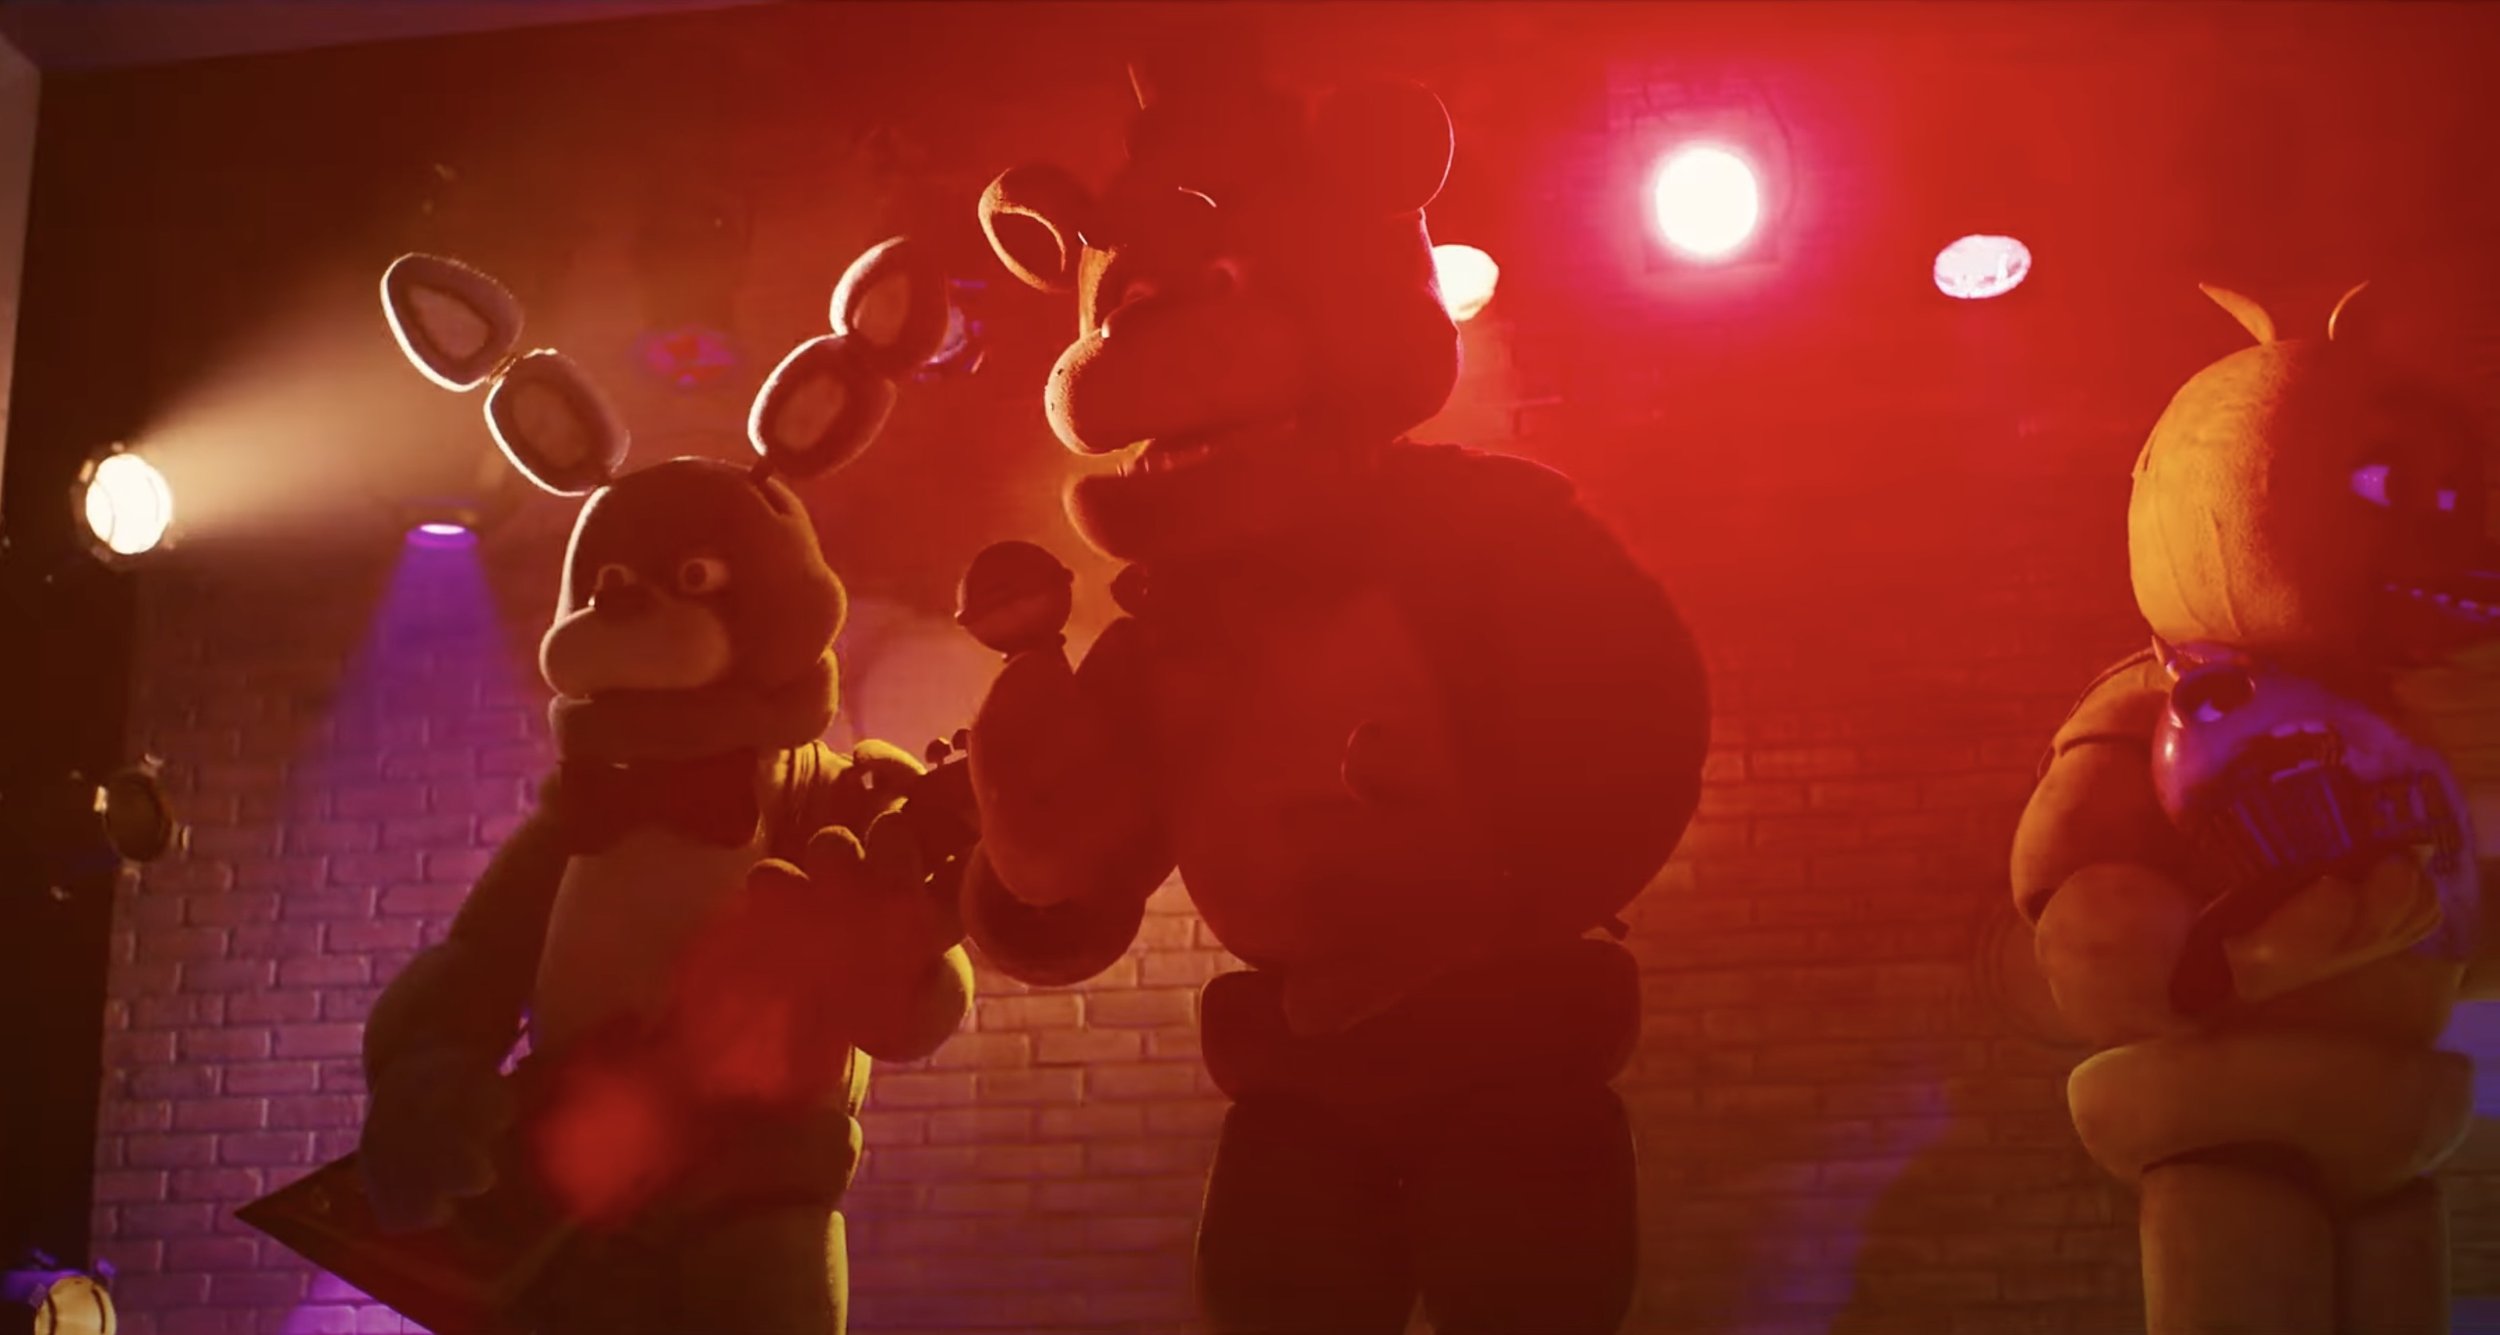 Five Nights At Freddy's  A Look Inside Featurette 